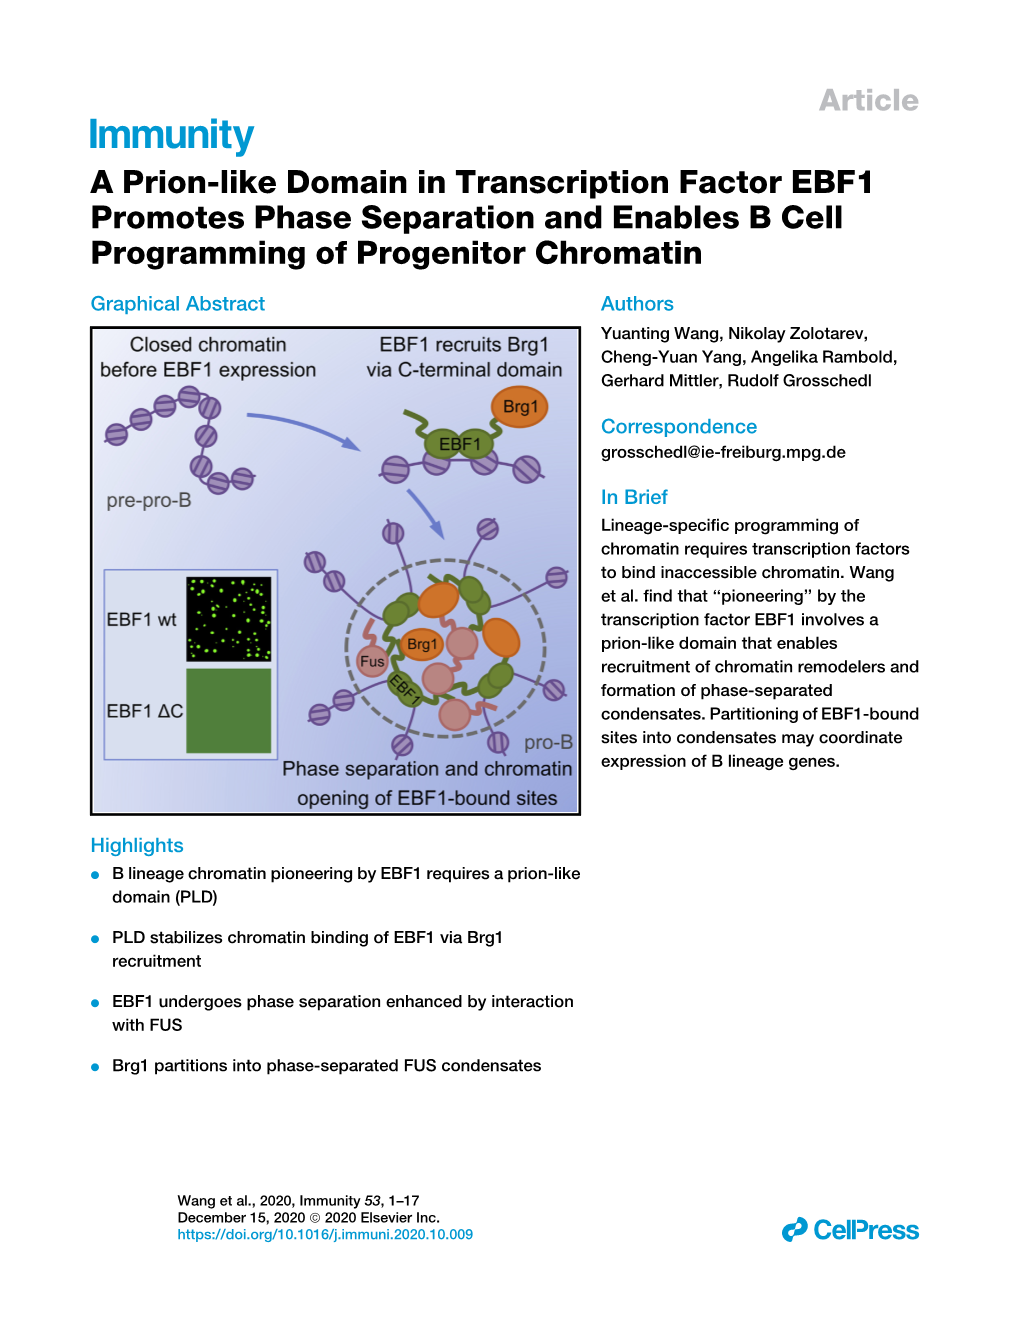 A Prion-Like Domain in Transcription Factor EBF1 Promotes Phase Separation and Enables B Cell Programming of Progenitor Chromatin